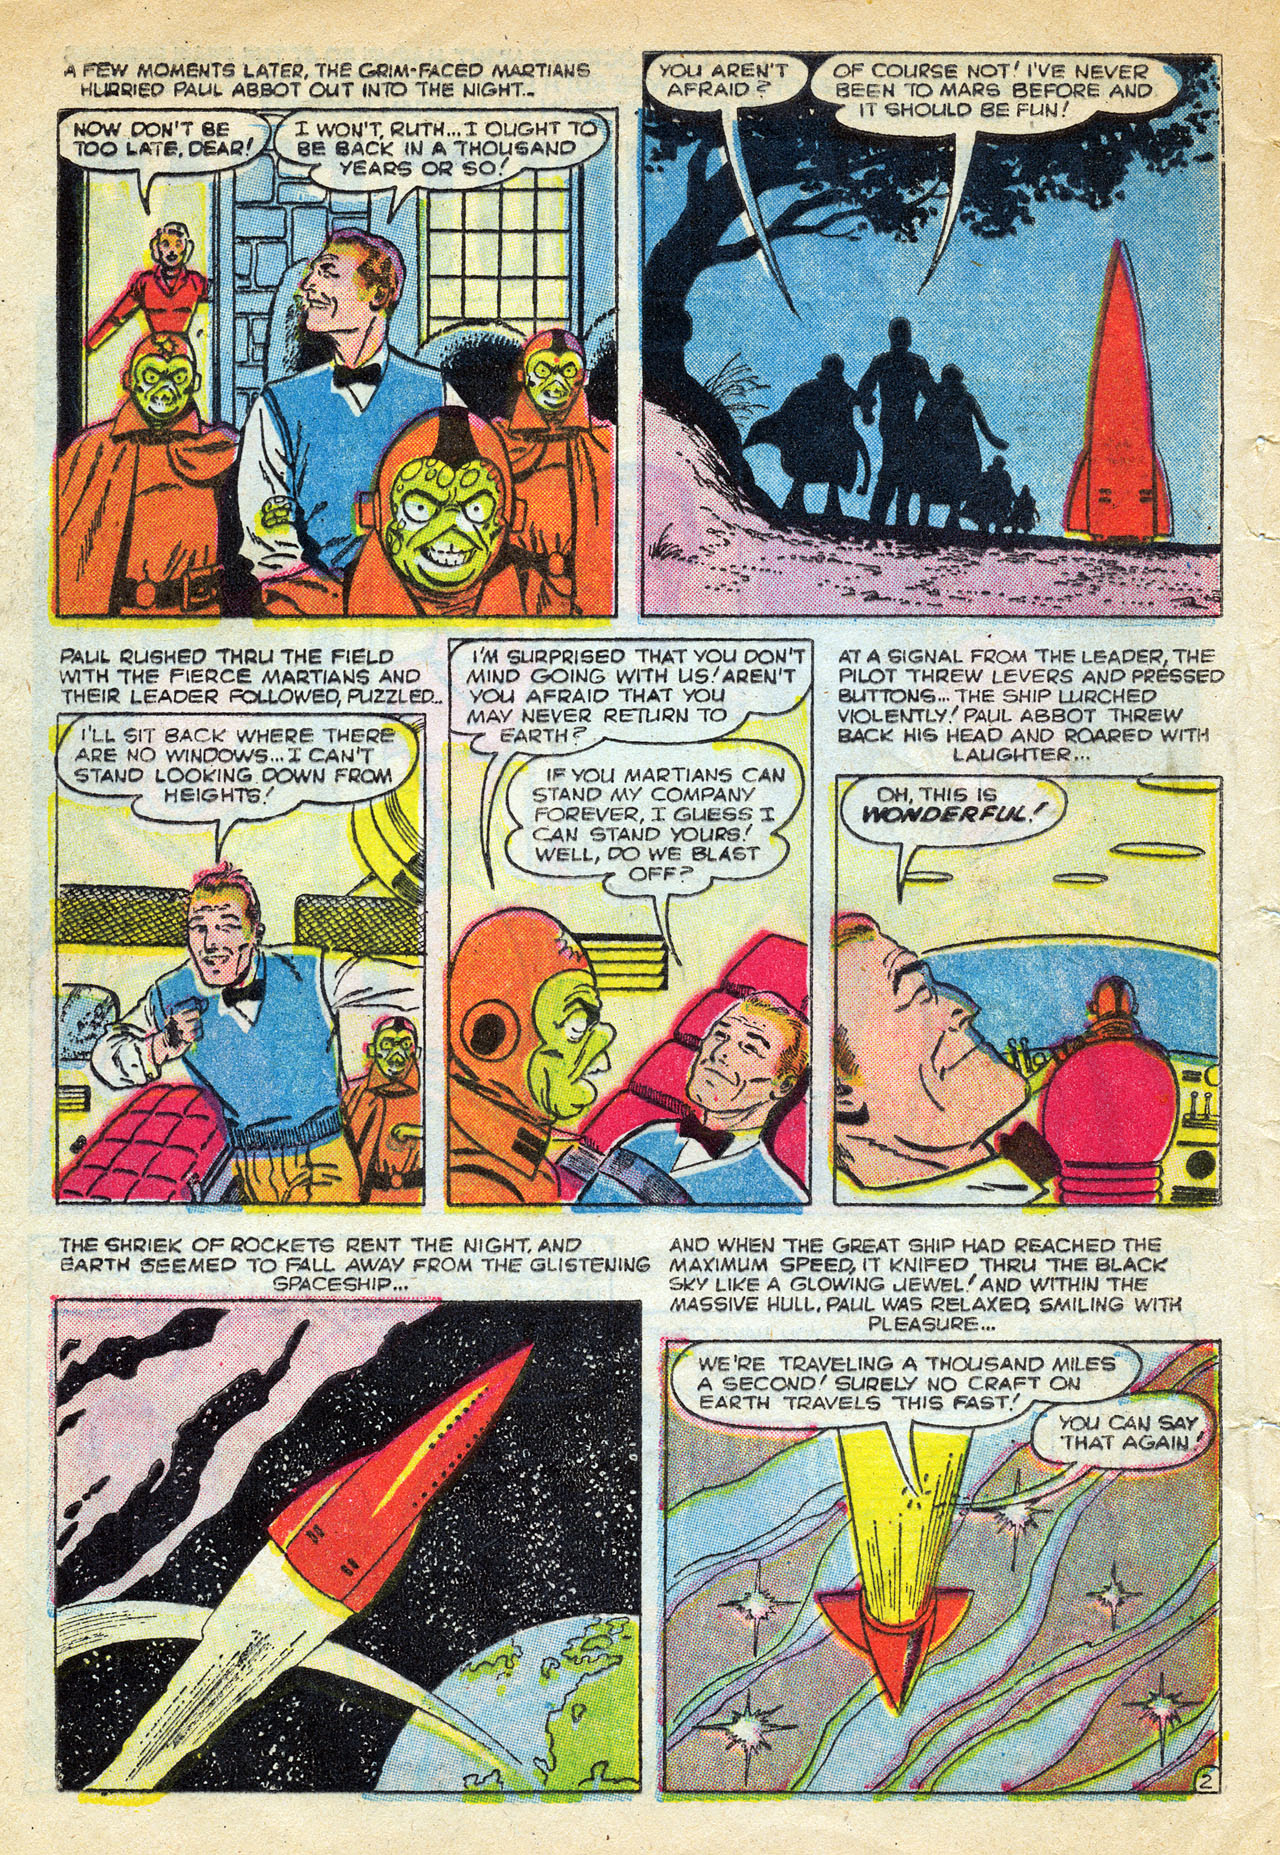 Marvel Tales (1949) 140 Page 3